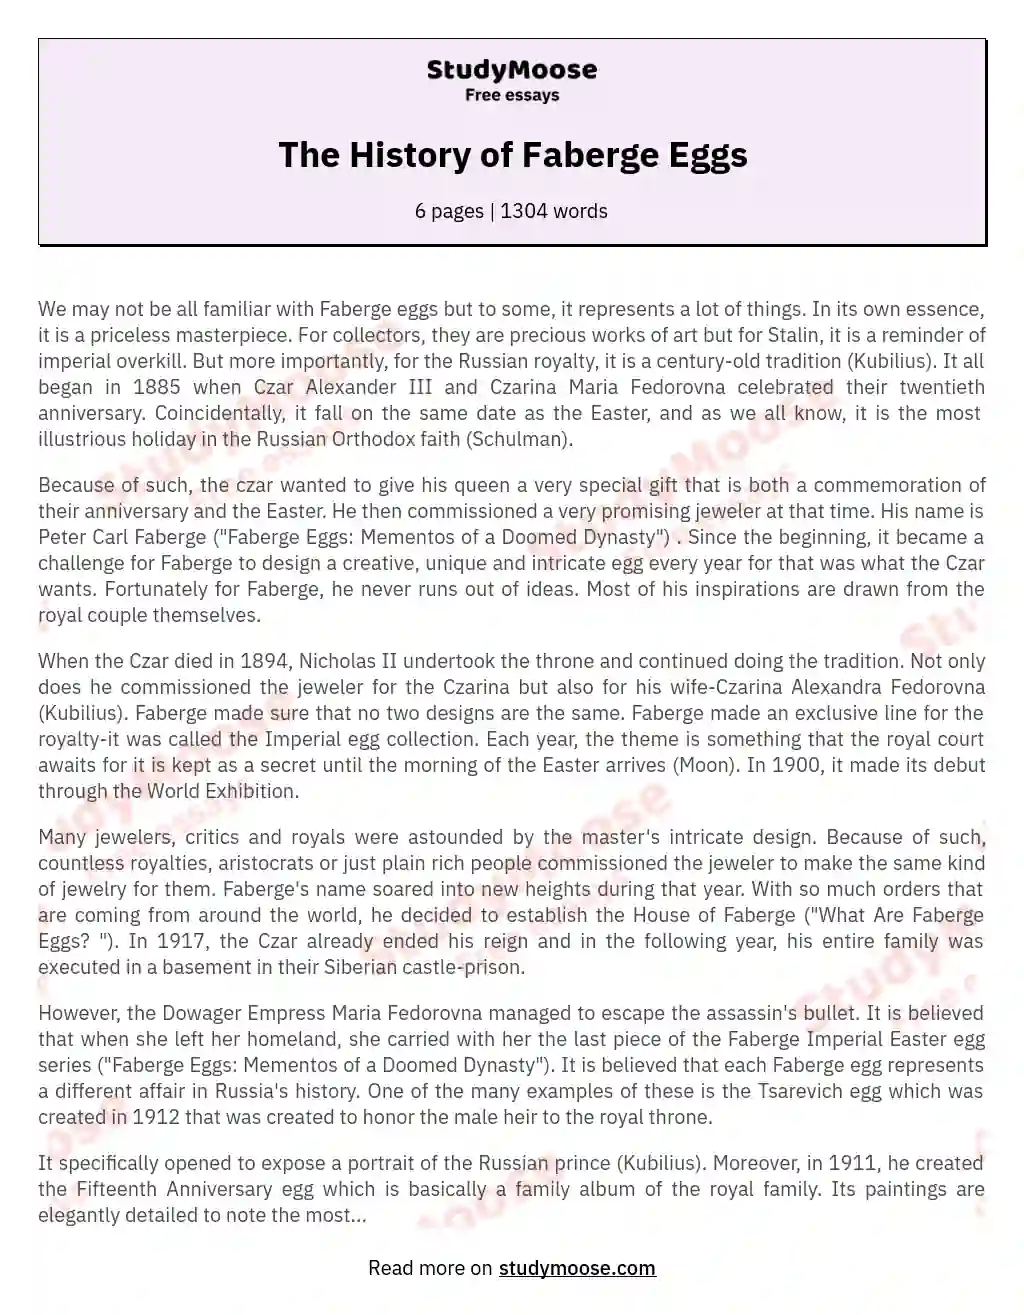 The History of Faberge Eggs essay